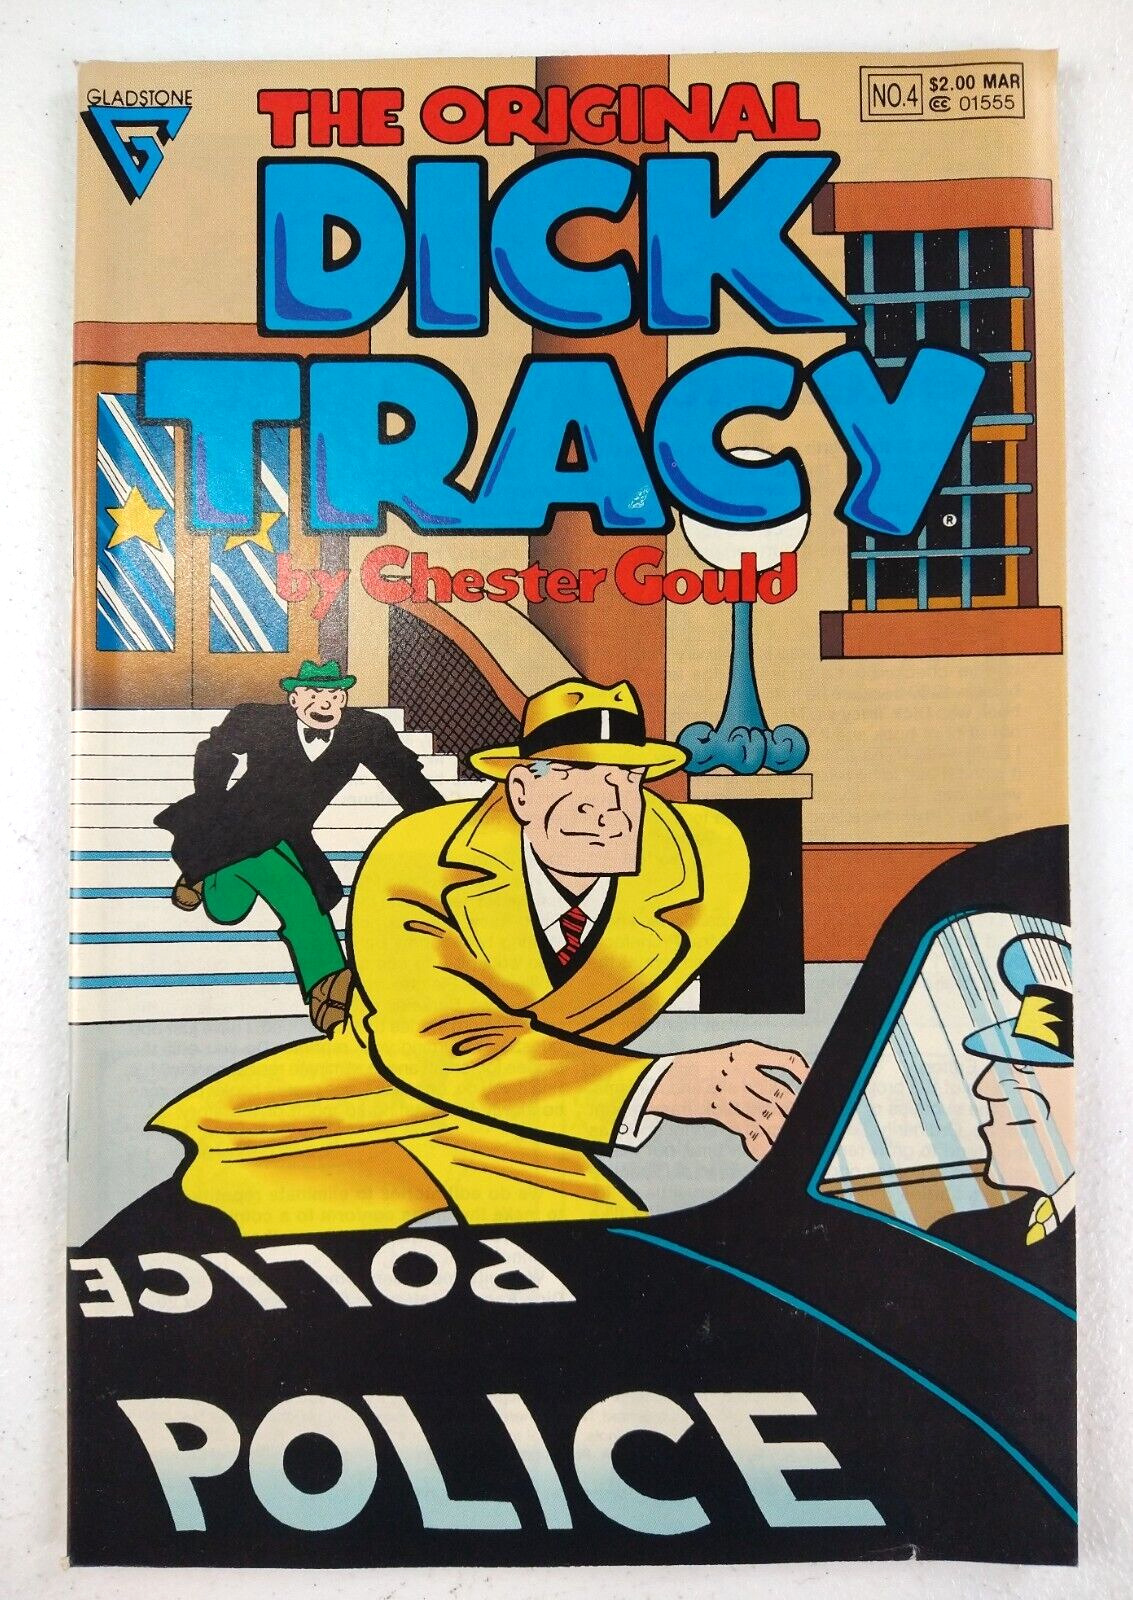 The Original Dick Tracy #4 (1991 Gladstone) Comic by Chester Gould VF+ or better